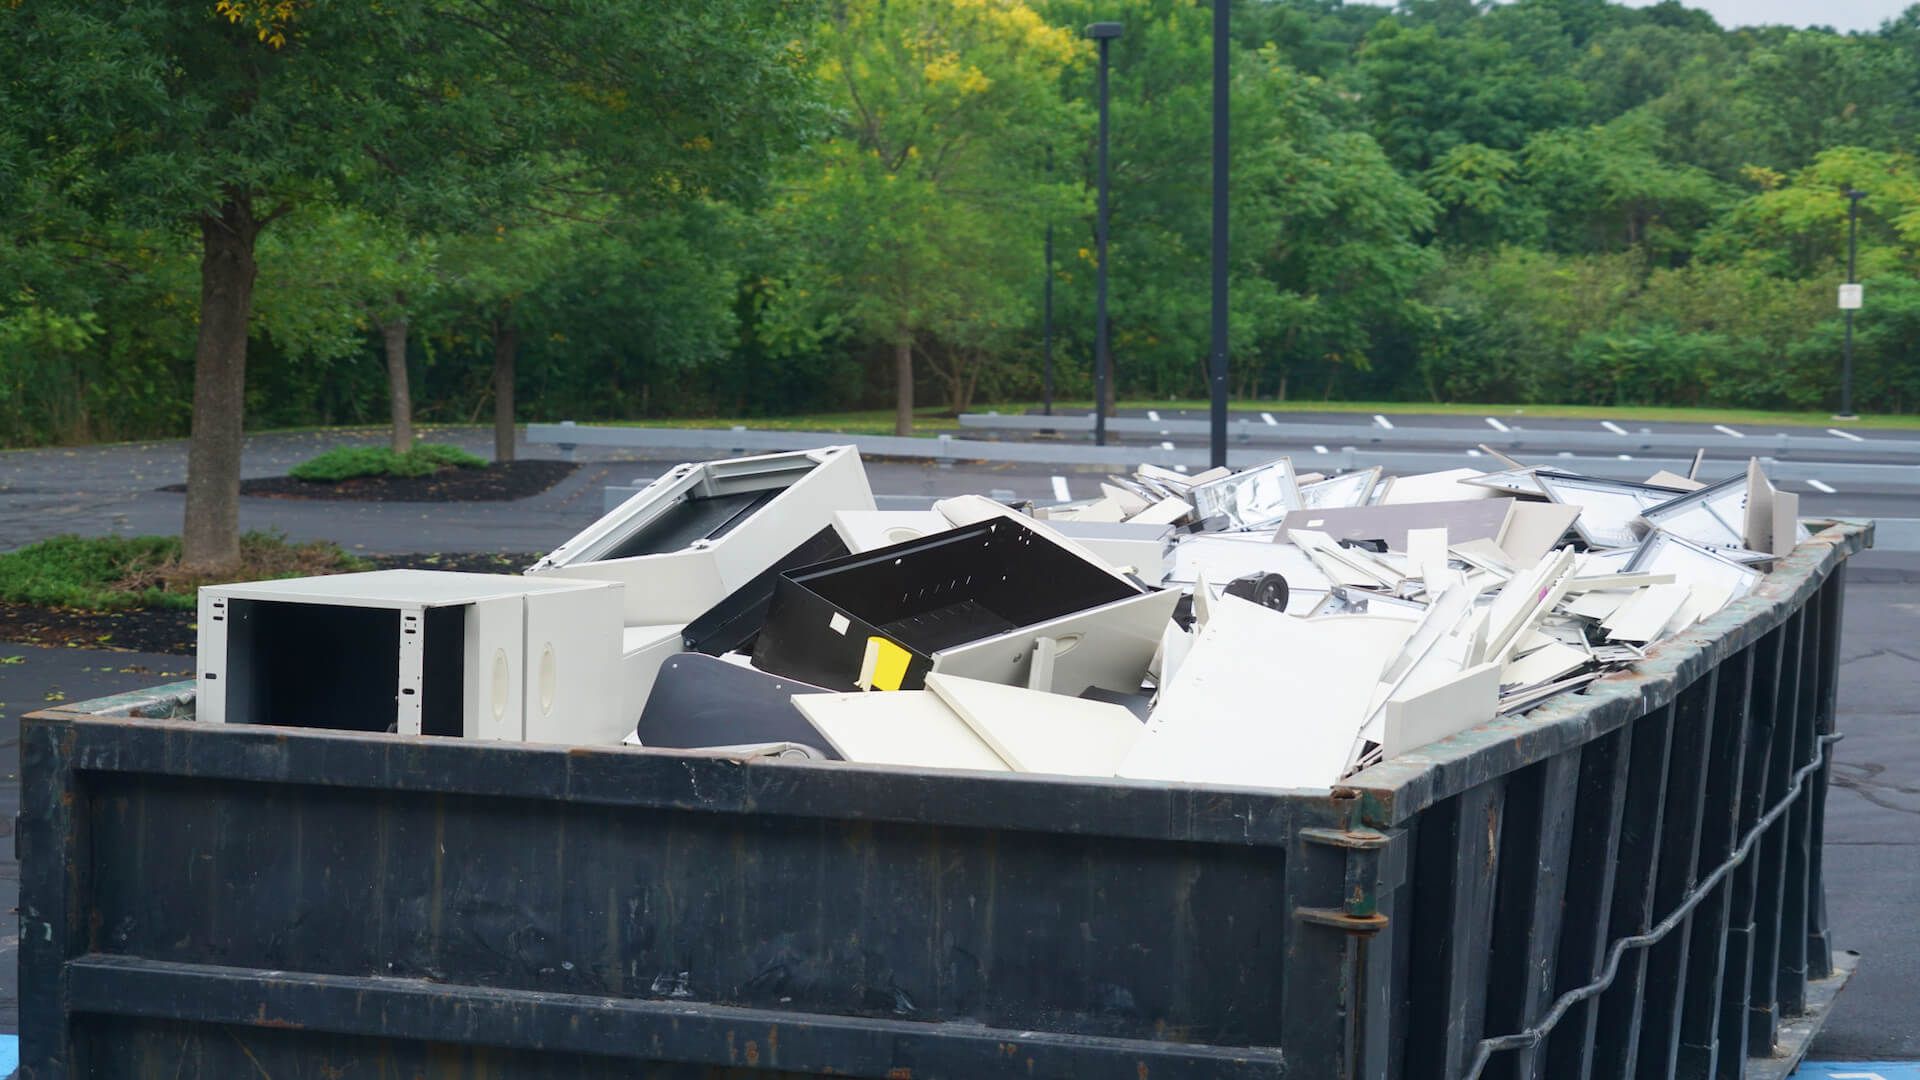 Dumpster Rentals Company Pittsburgh Pa